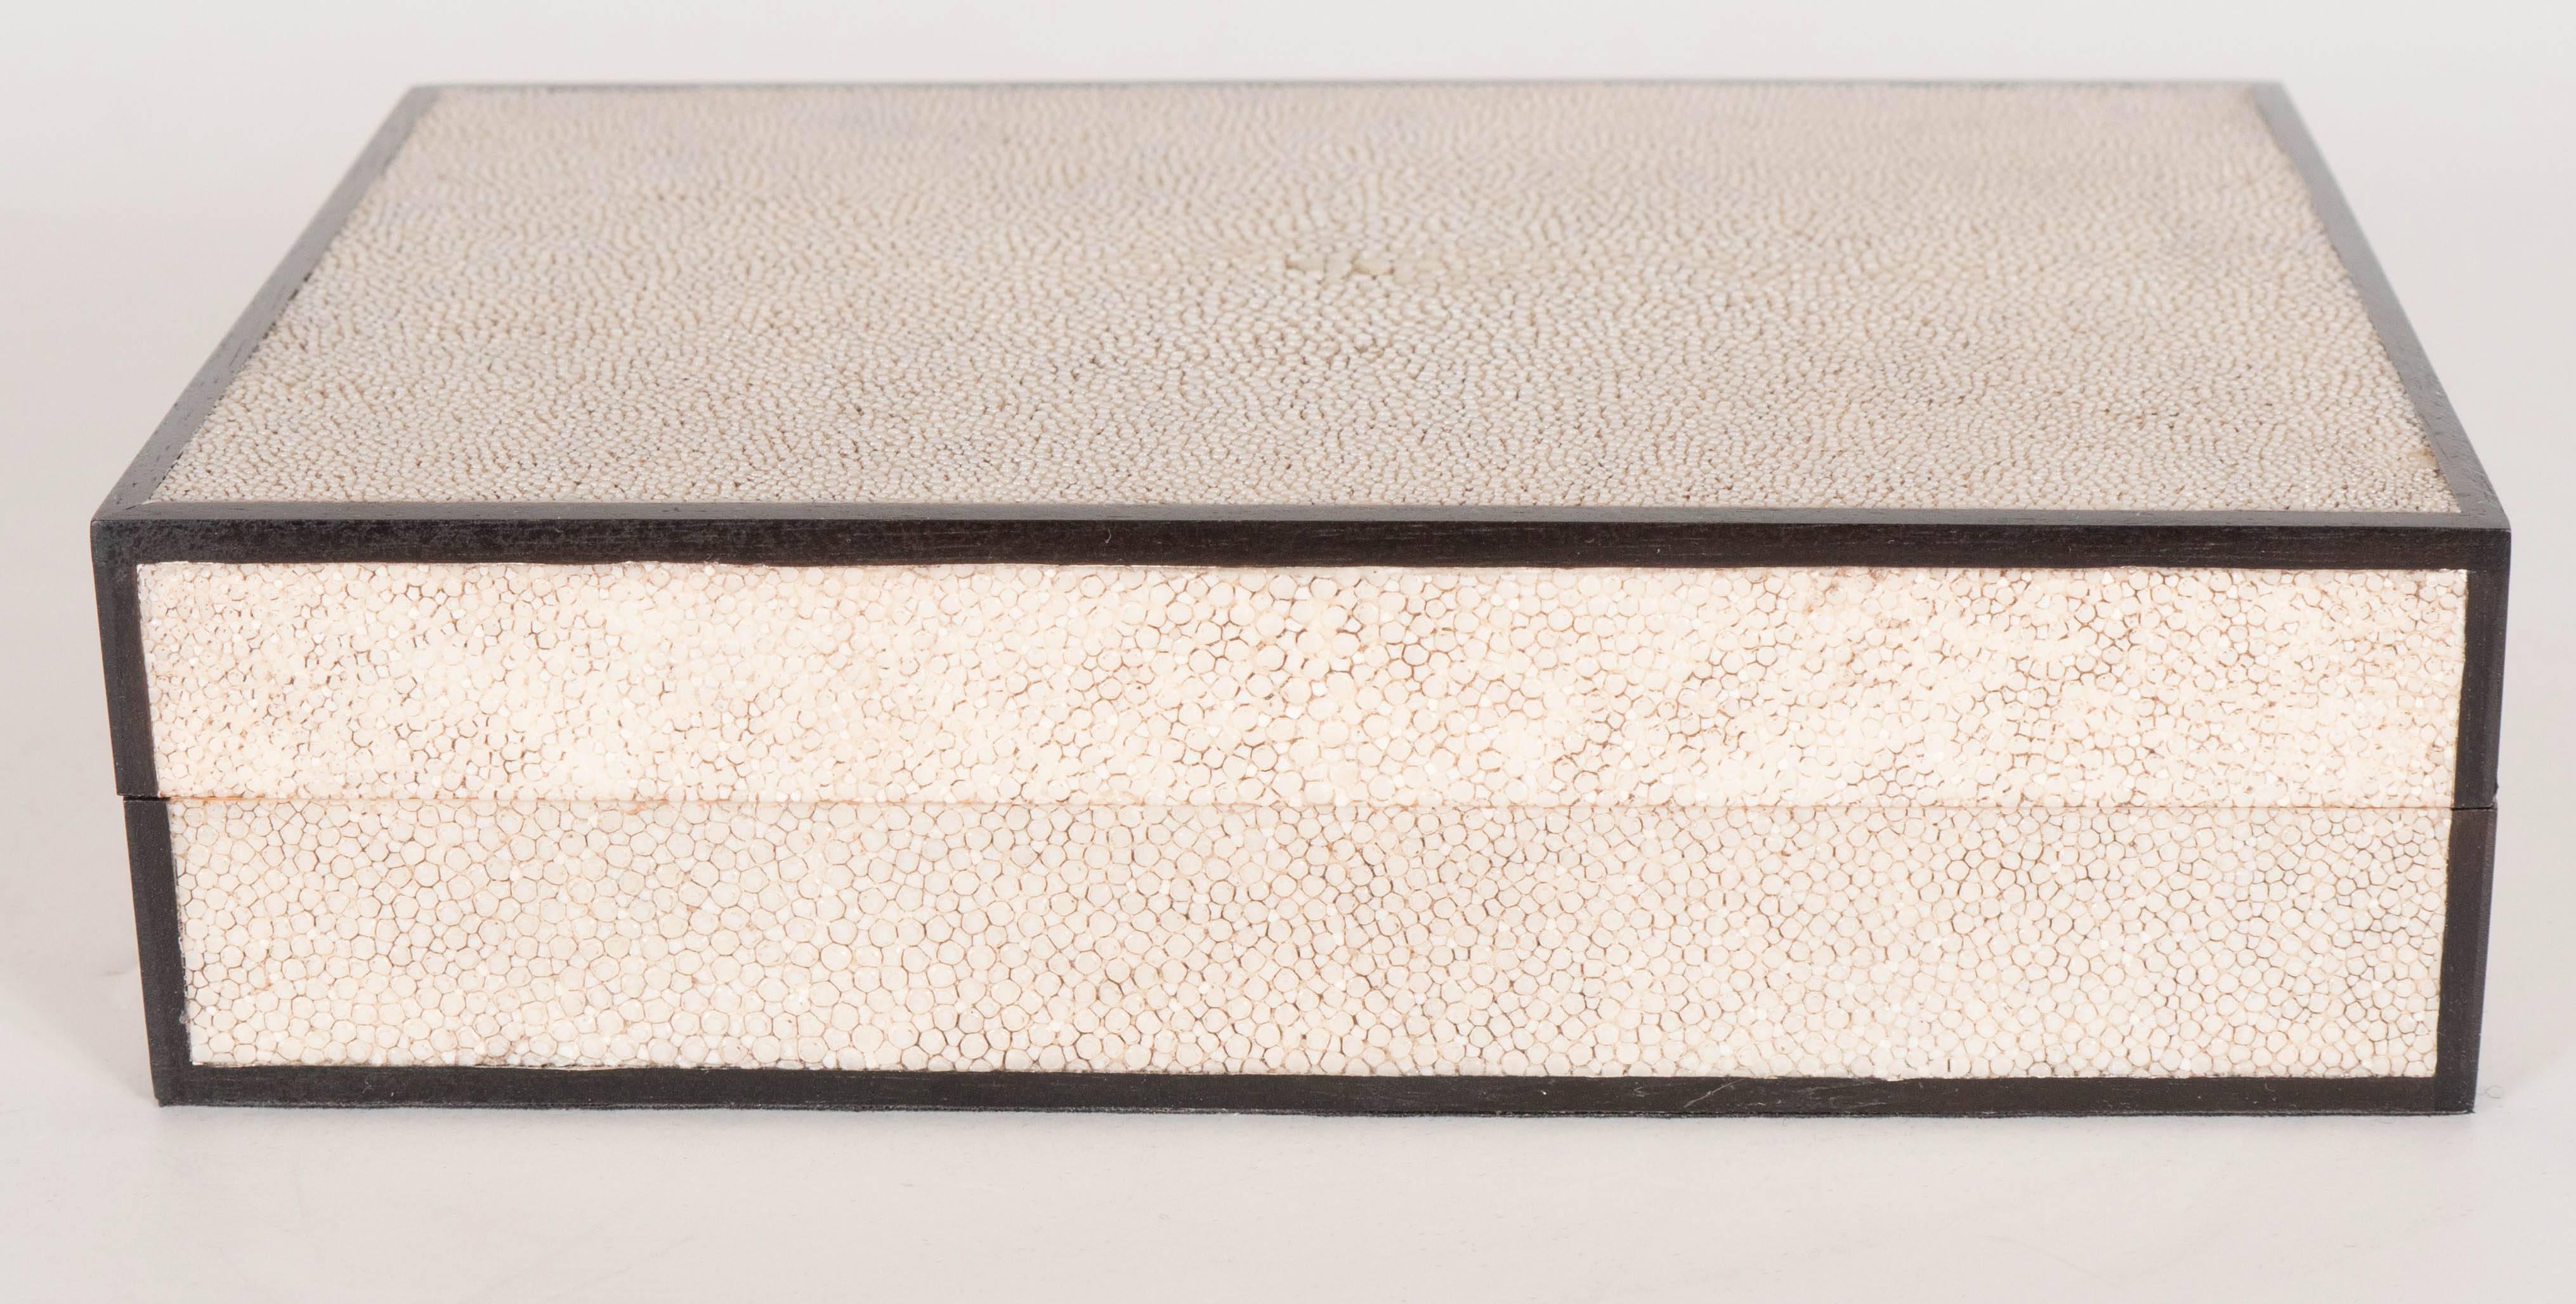 A very chic box fully wrapped in ivory-dyed shagreen, with a removable lid, with a jet-black wood trim along its perimeter. The inside is lined with lacquered oak. A perfect addition to any cocktail table vanity, console or shelf. This piece is in